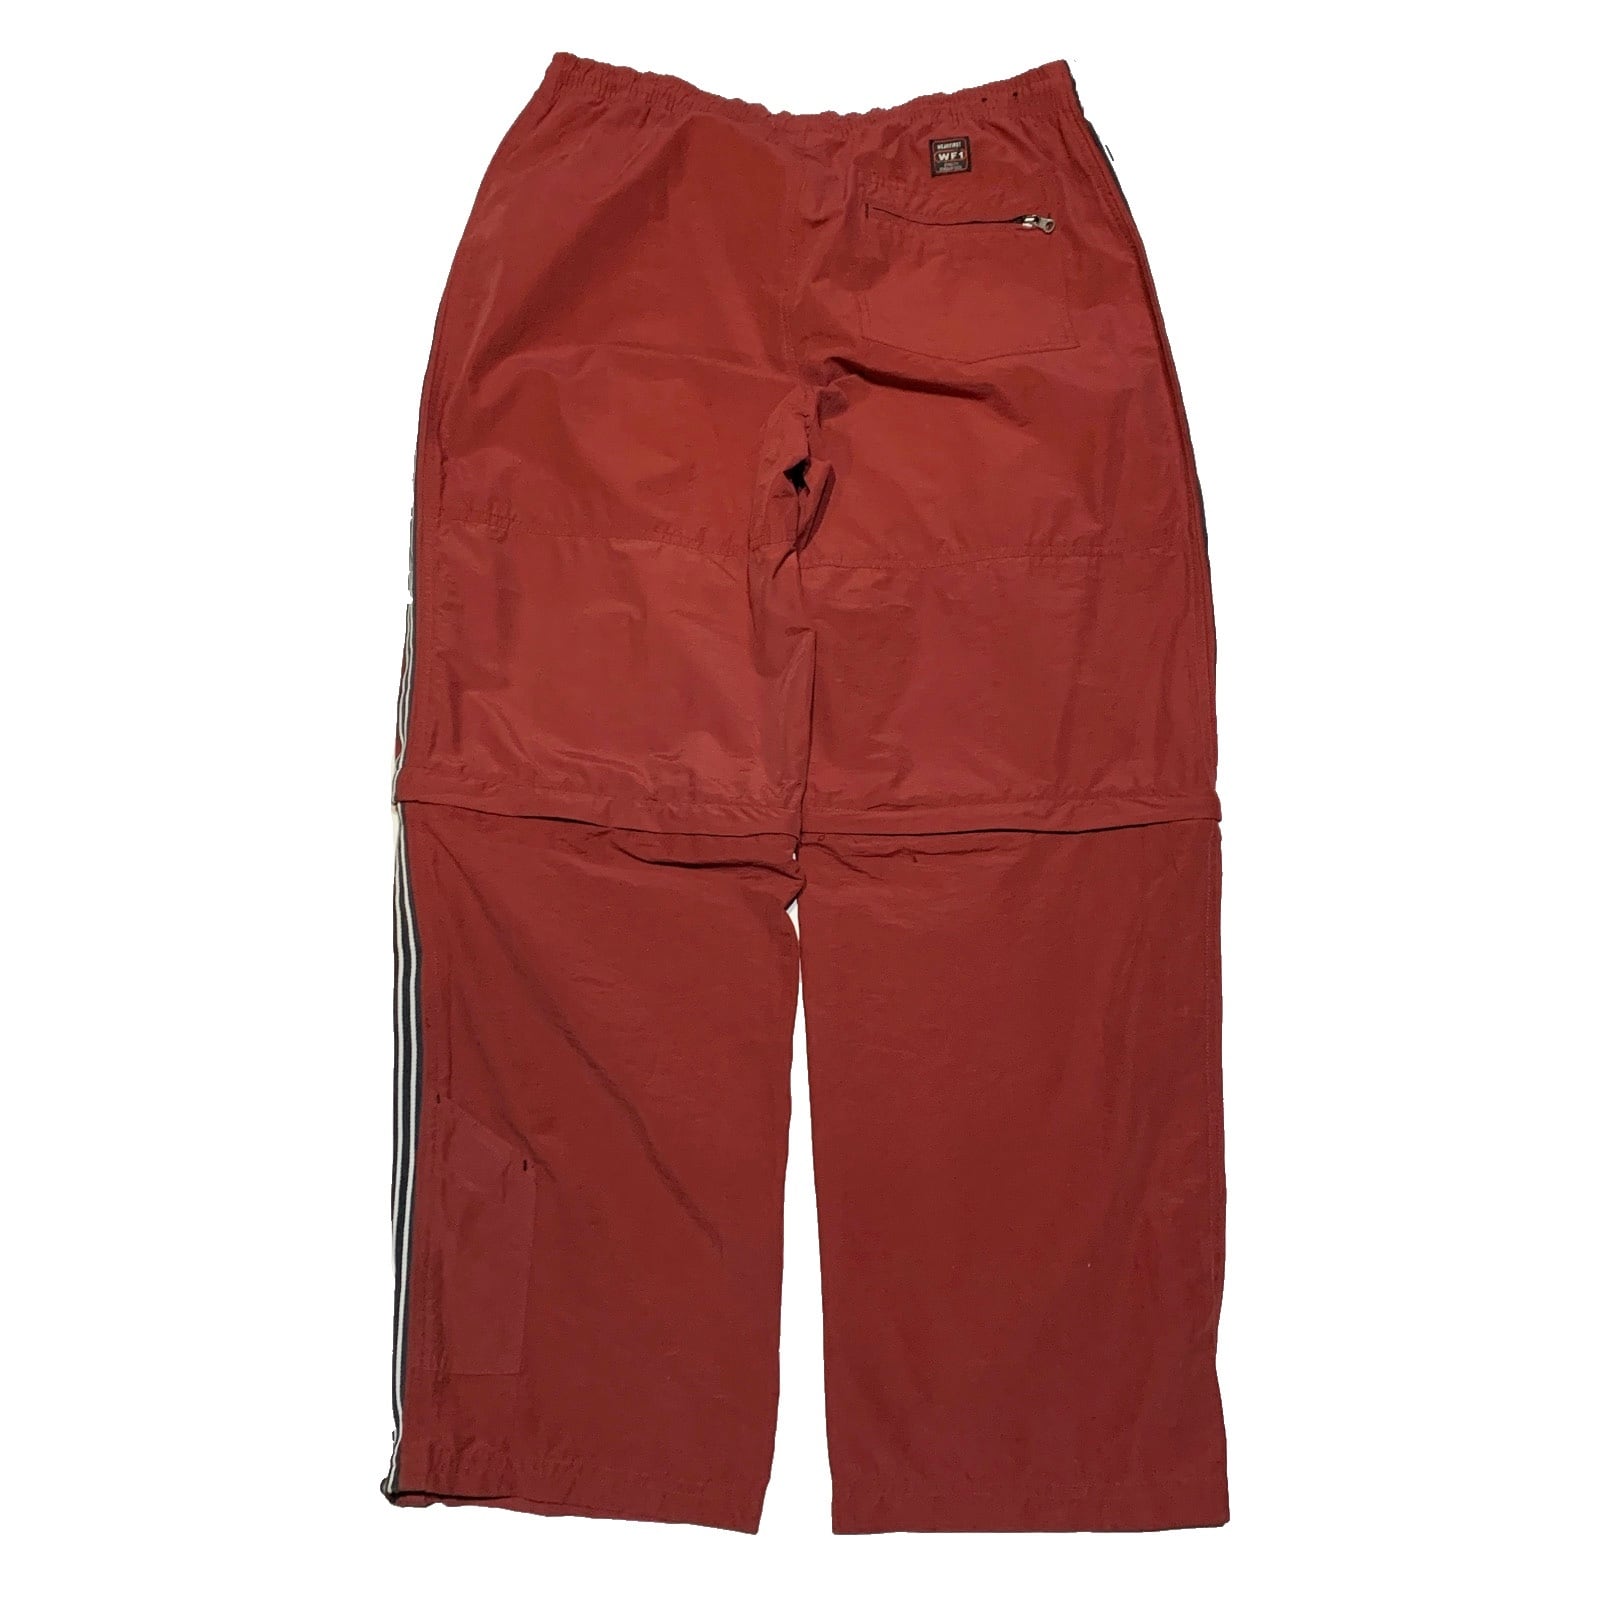 1990s wearfirst gimmick buggy cargo pant